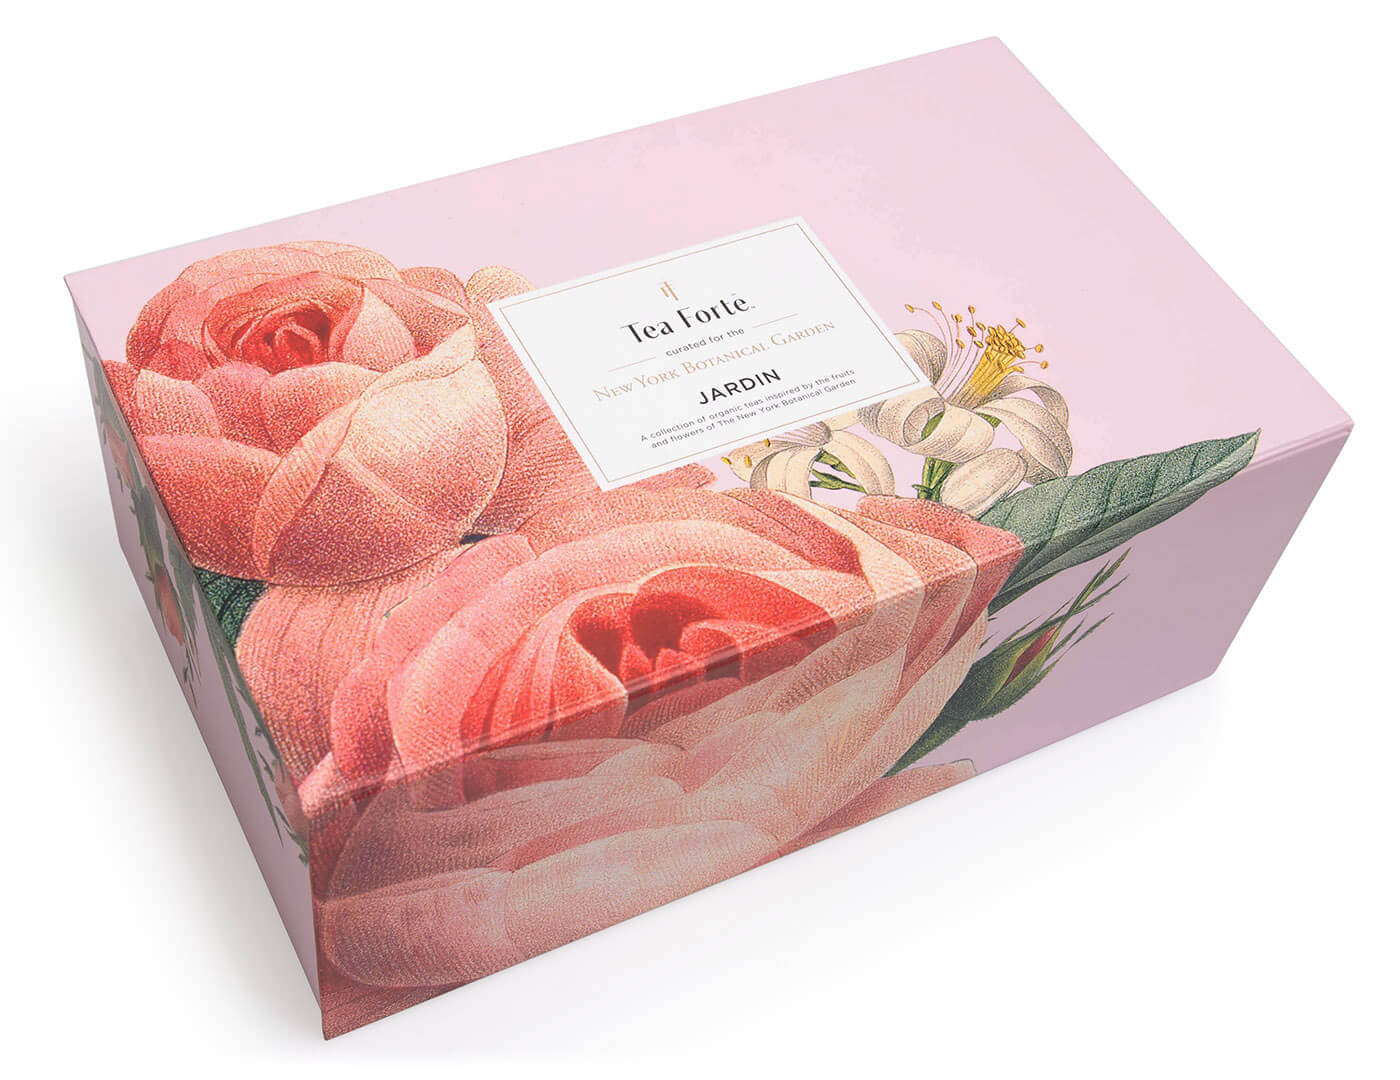 Jardin Collection Gift Set box, with lid closed